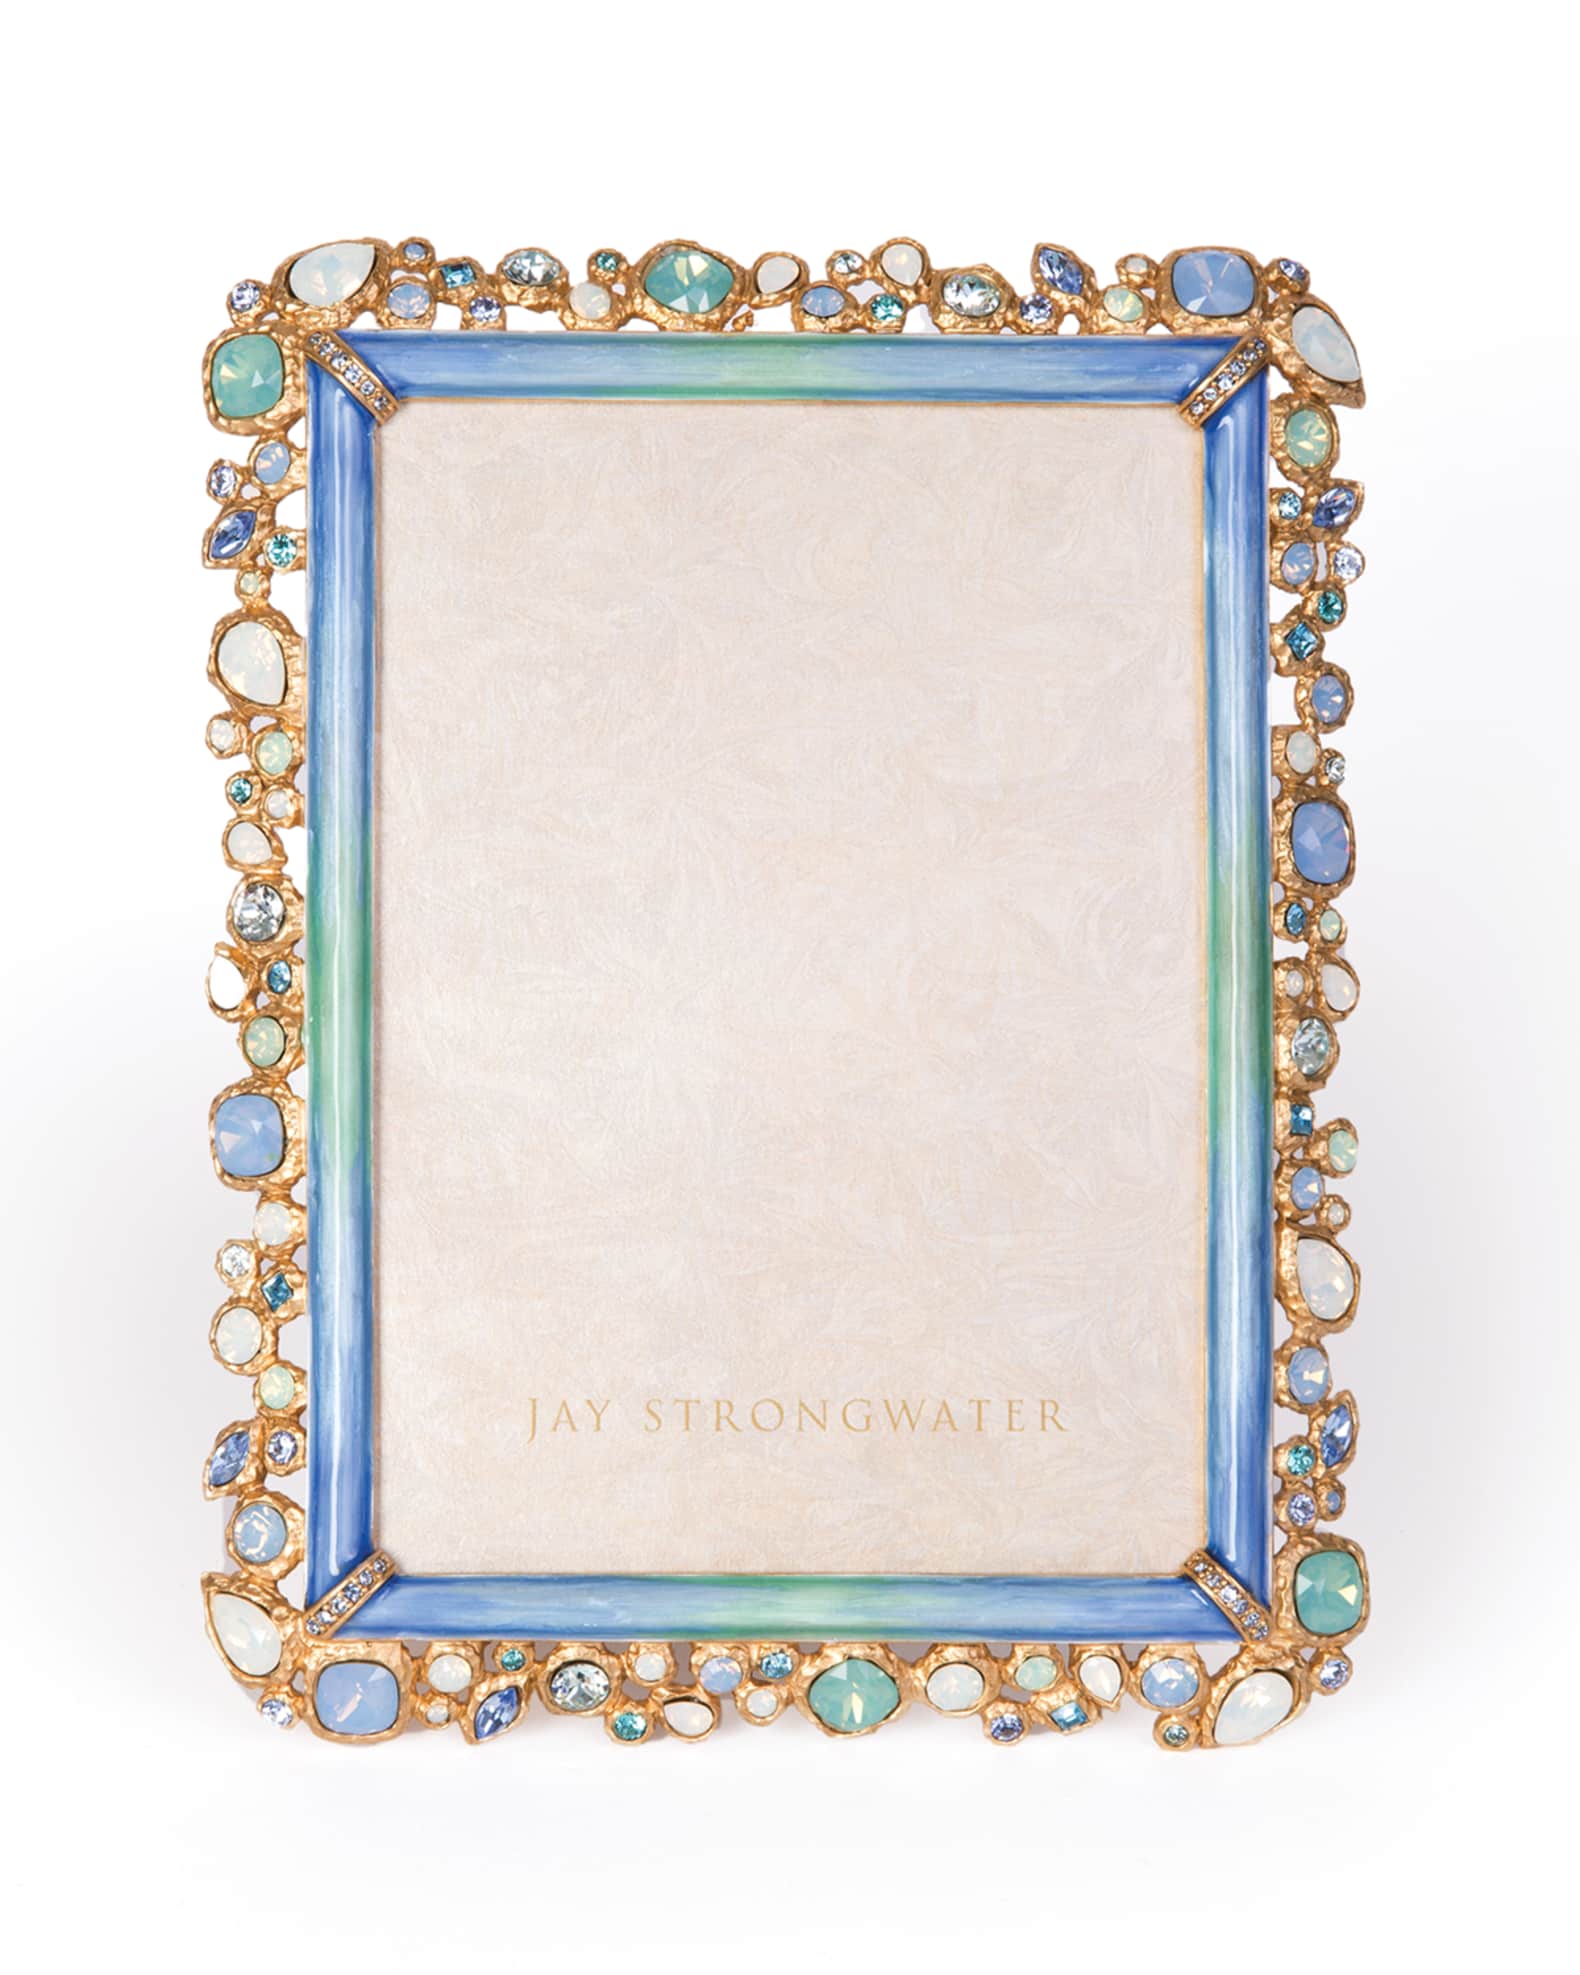 Jay Strongwater Oceana Bejeweled Picture Frame, 5" x 7"